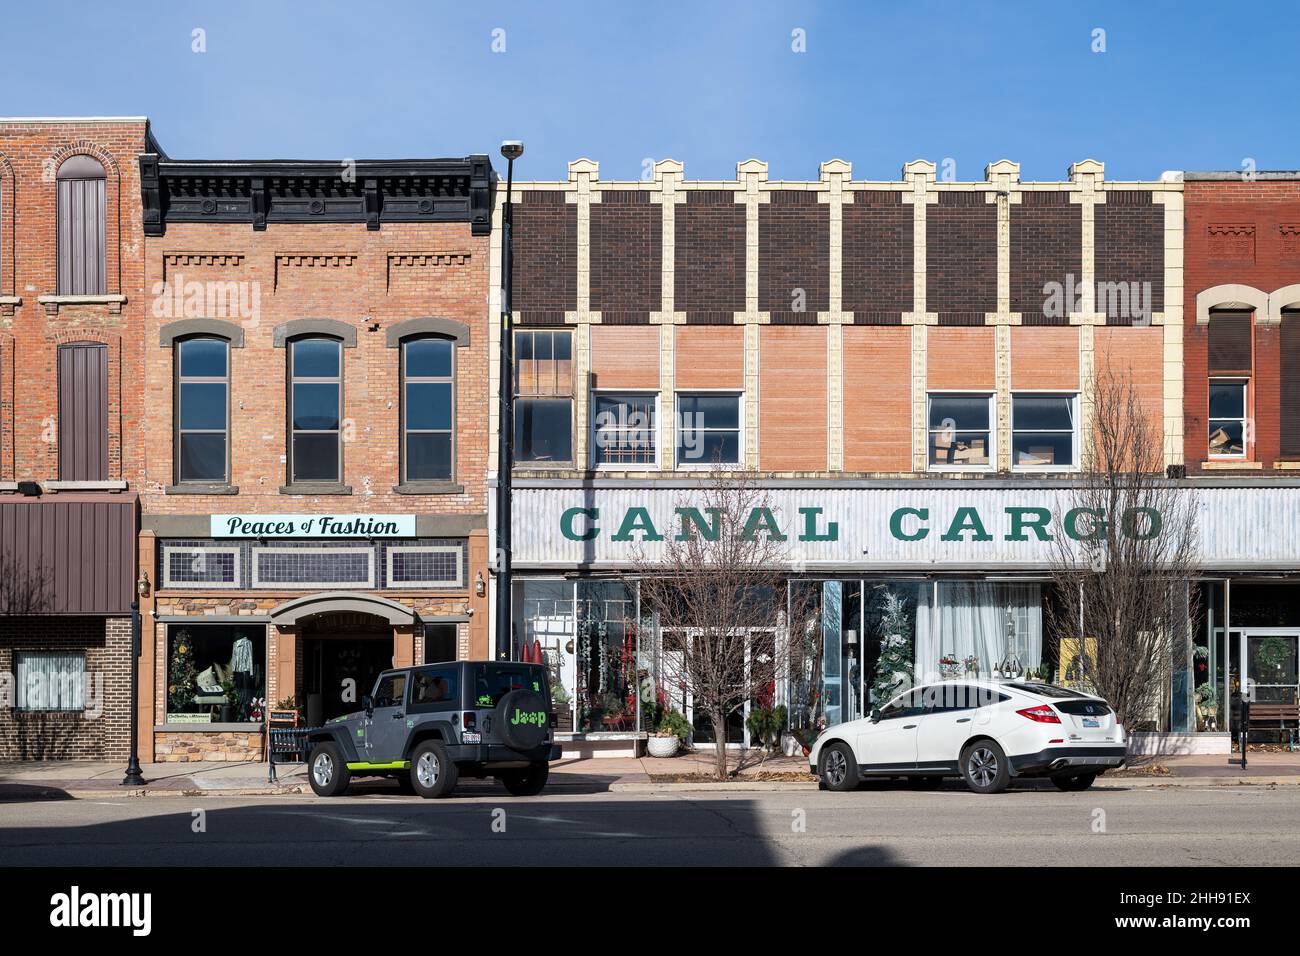 Buildings in downtown LaSalle Illinois Stock Photo